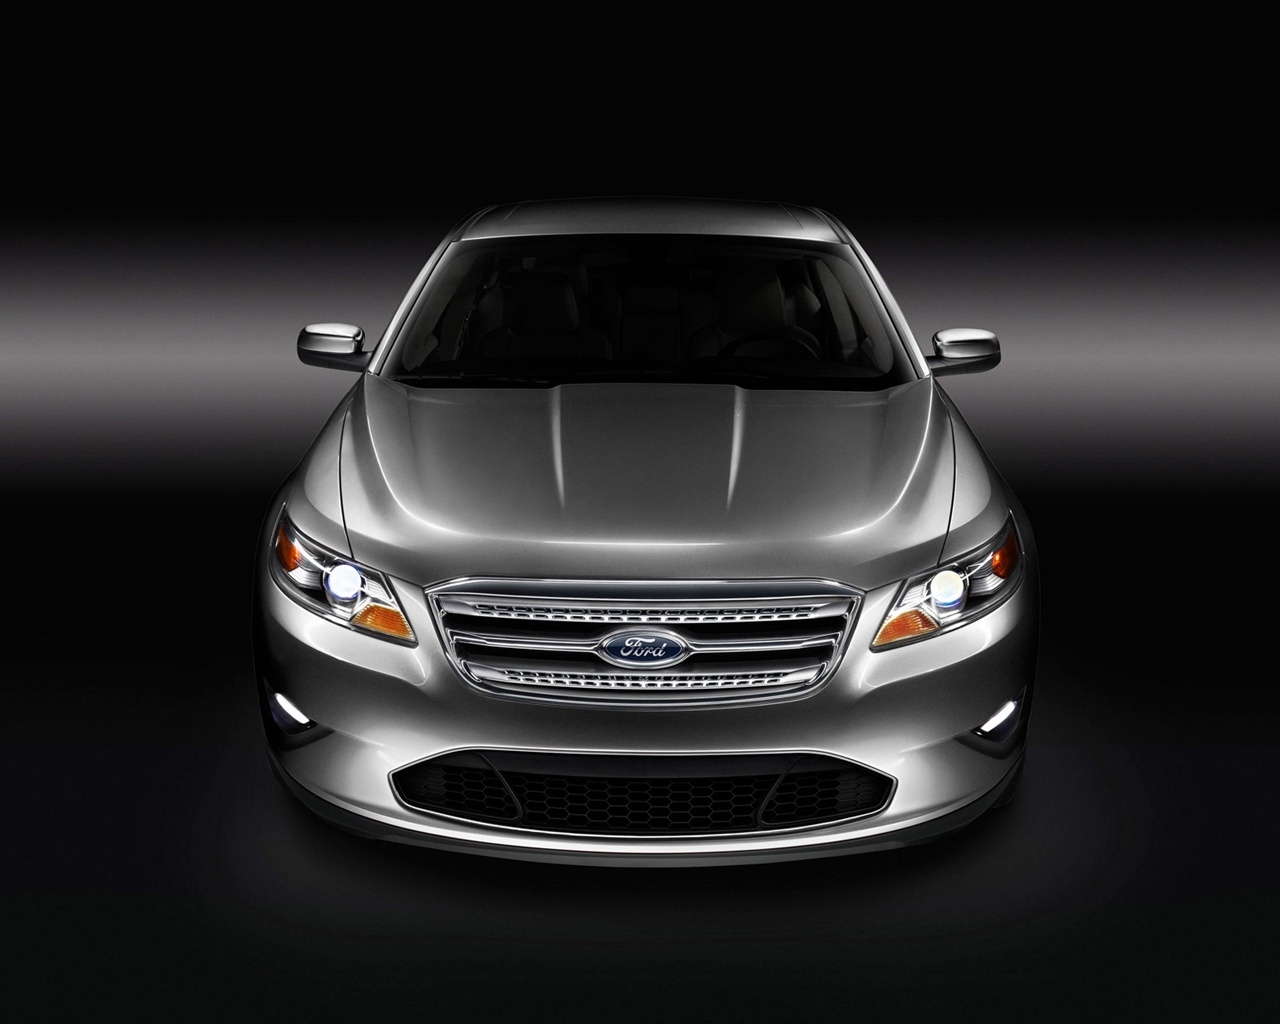 Ford Taurus 2010 for 1280 x 1024 resolution